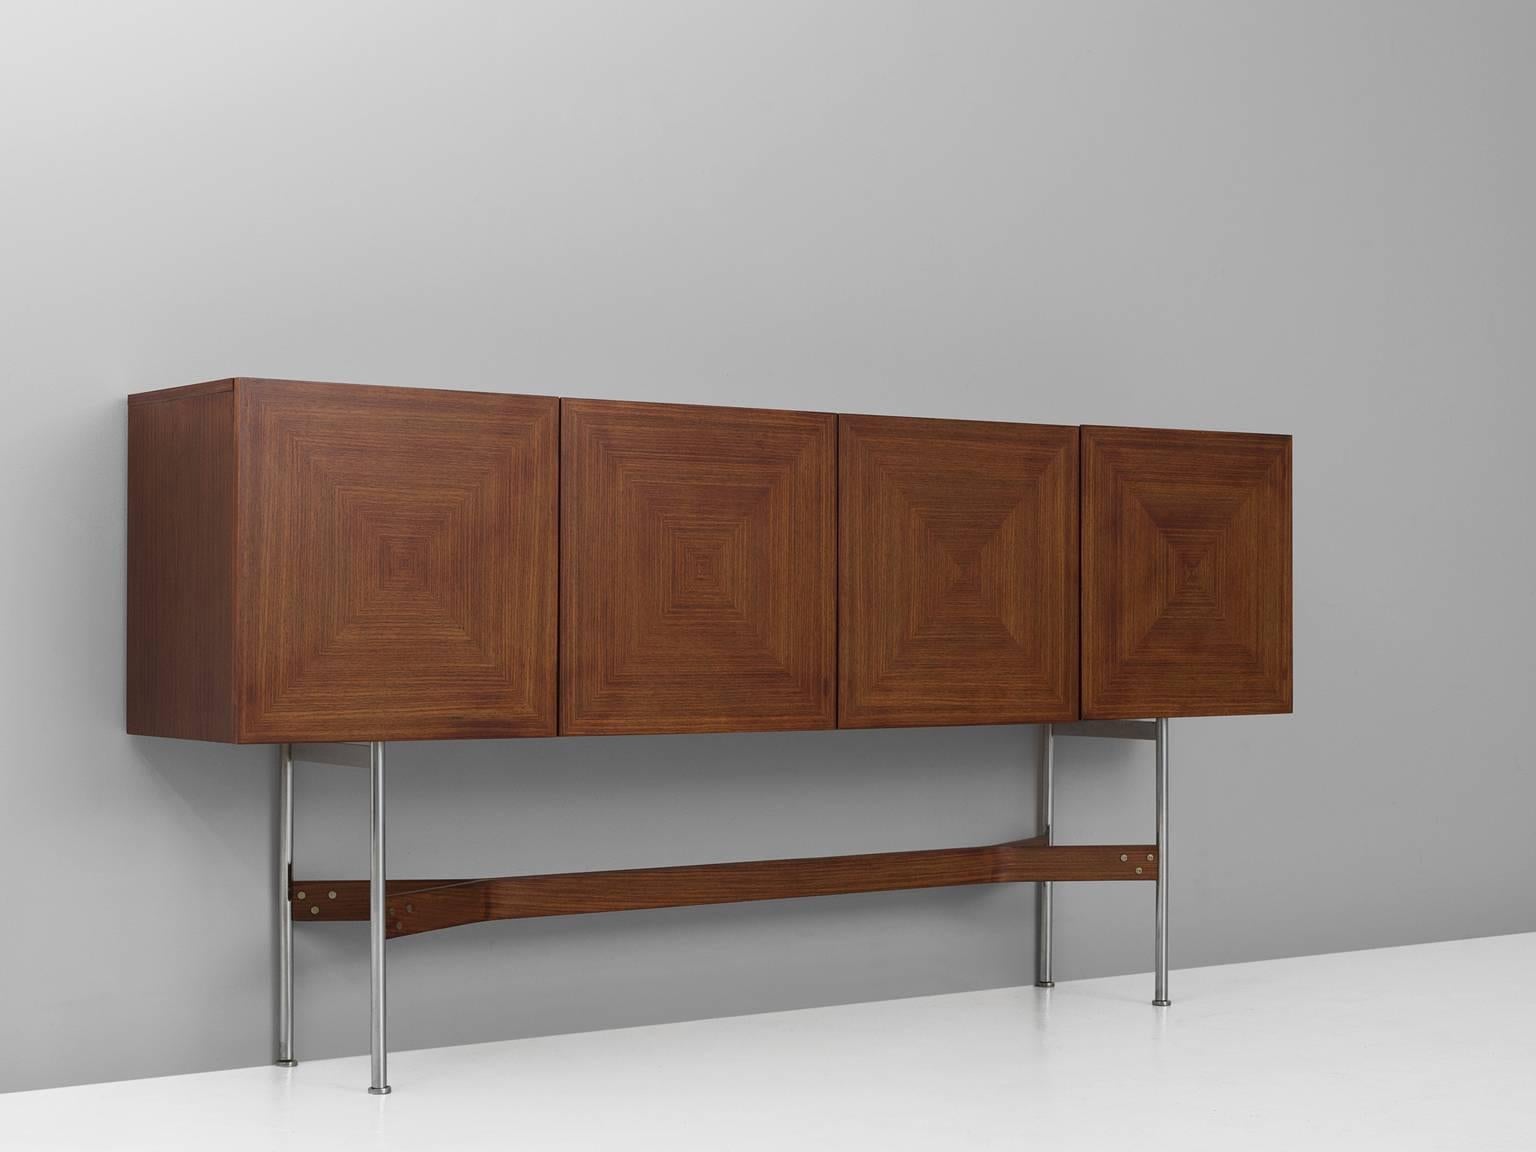 Rudolf Bernd Glatzel for Fristho Franeker, sideboard, rosewood and metal, the Netherlands, 1962. 

Very well crafted highboard with beautiful proportions. The elegant brushed metal and rosewood base contribute to the floating effect of the four door